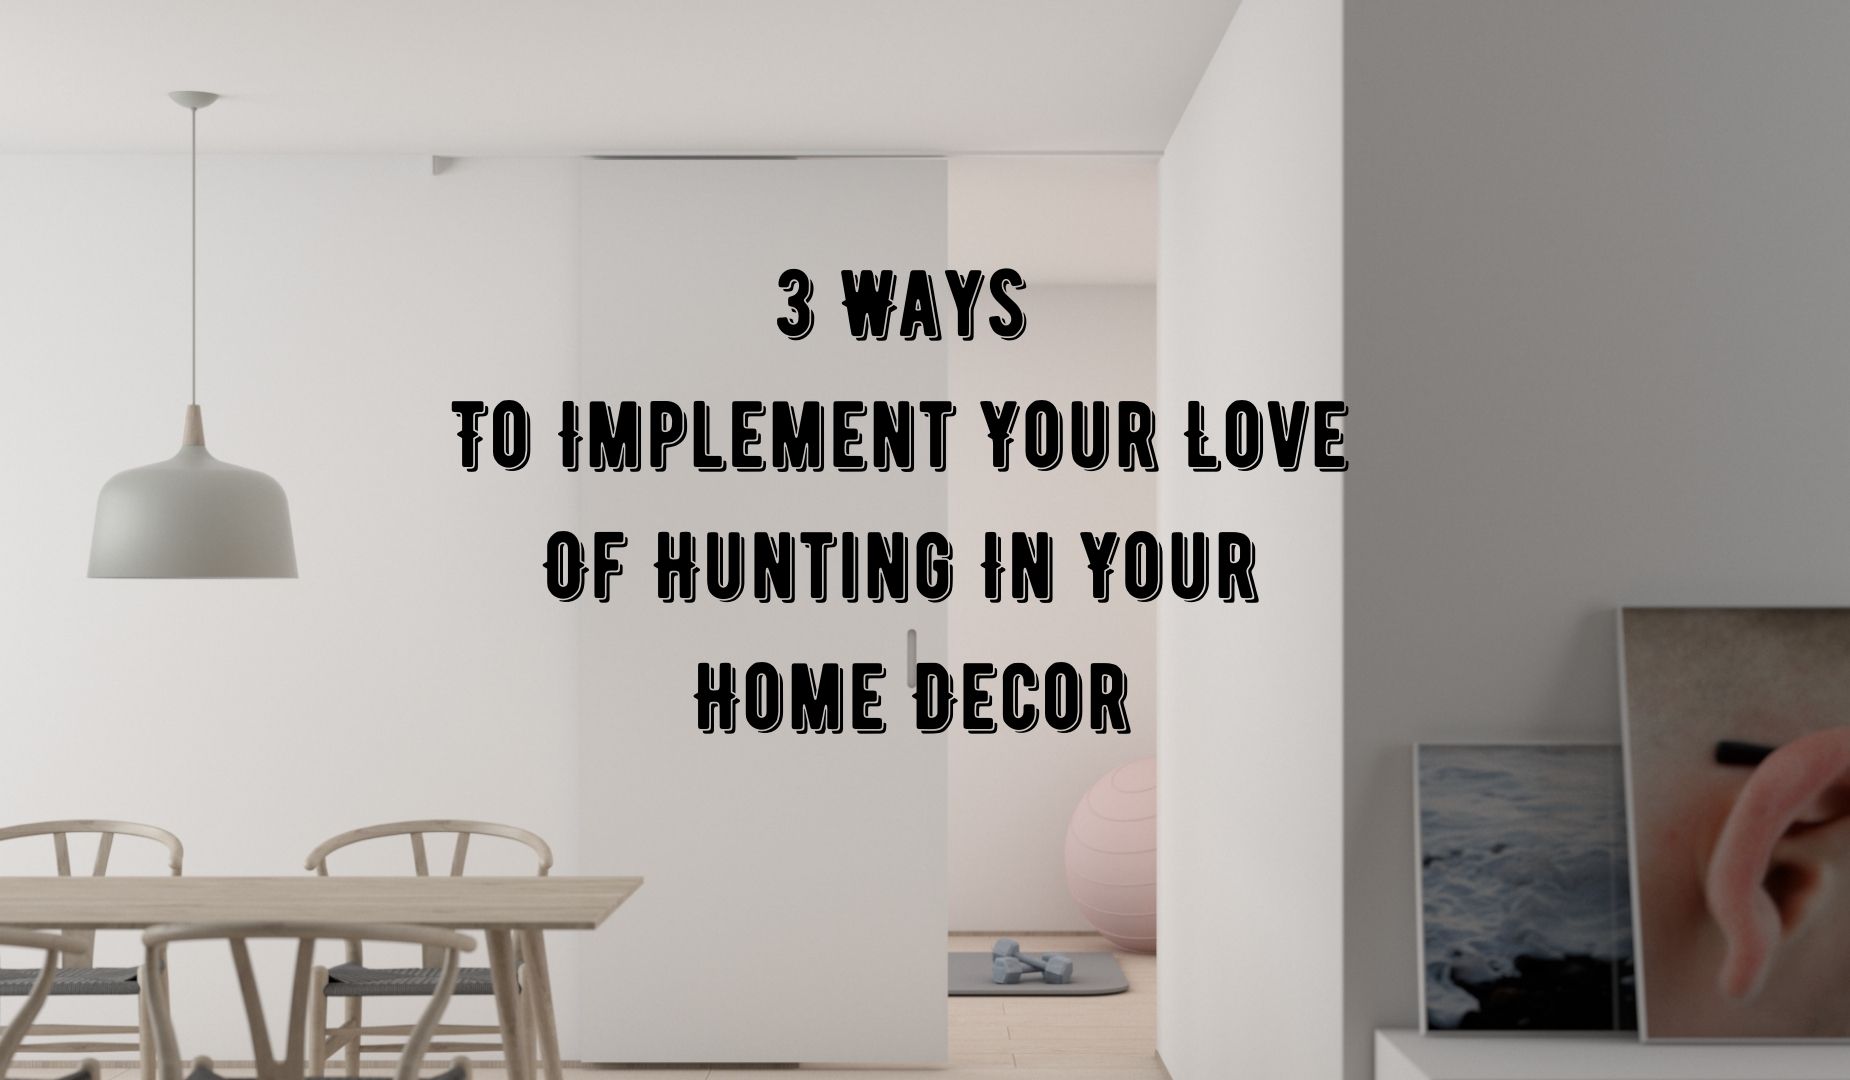 3 Ways To Implement Your Love Of Hunting In Your Home Decor